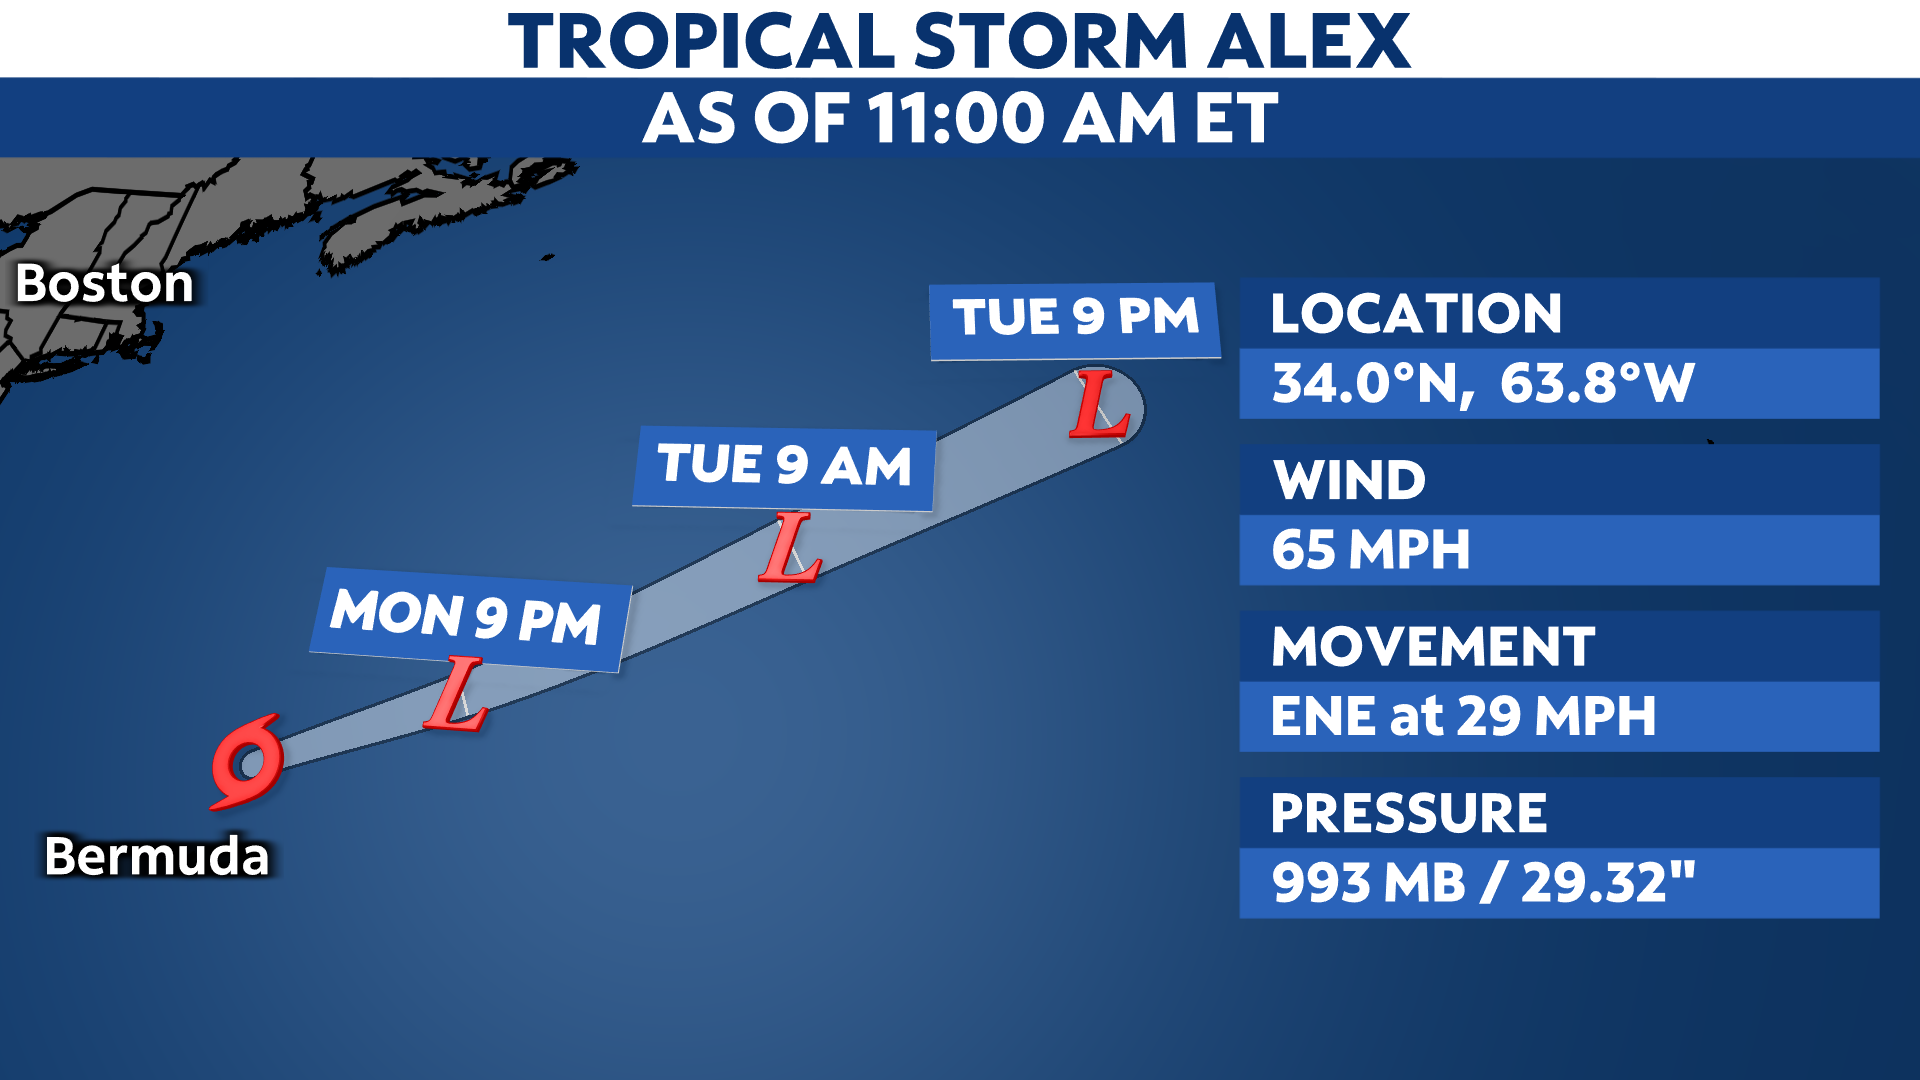 Tropical Storm Alex continues to move away from Bermuda